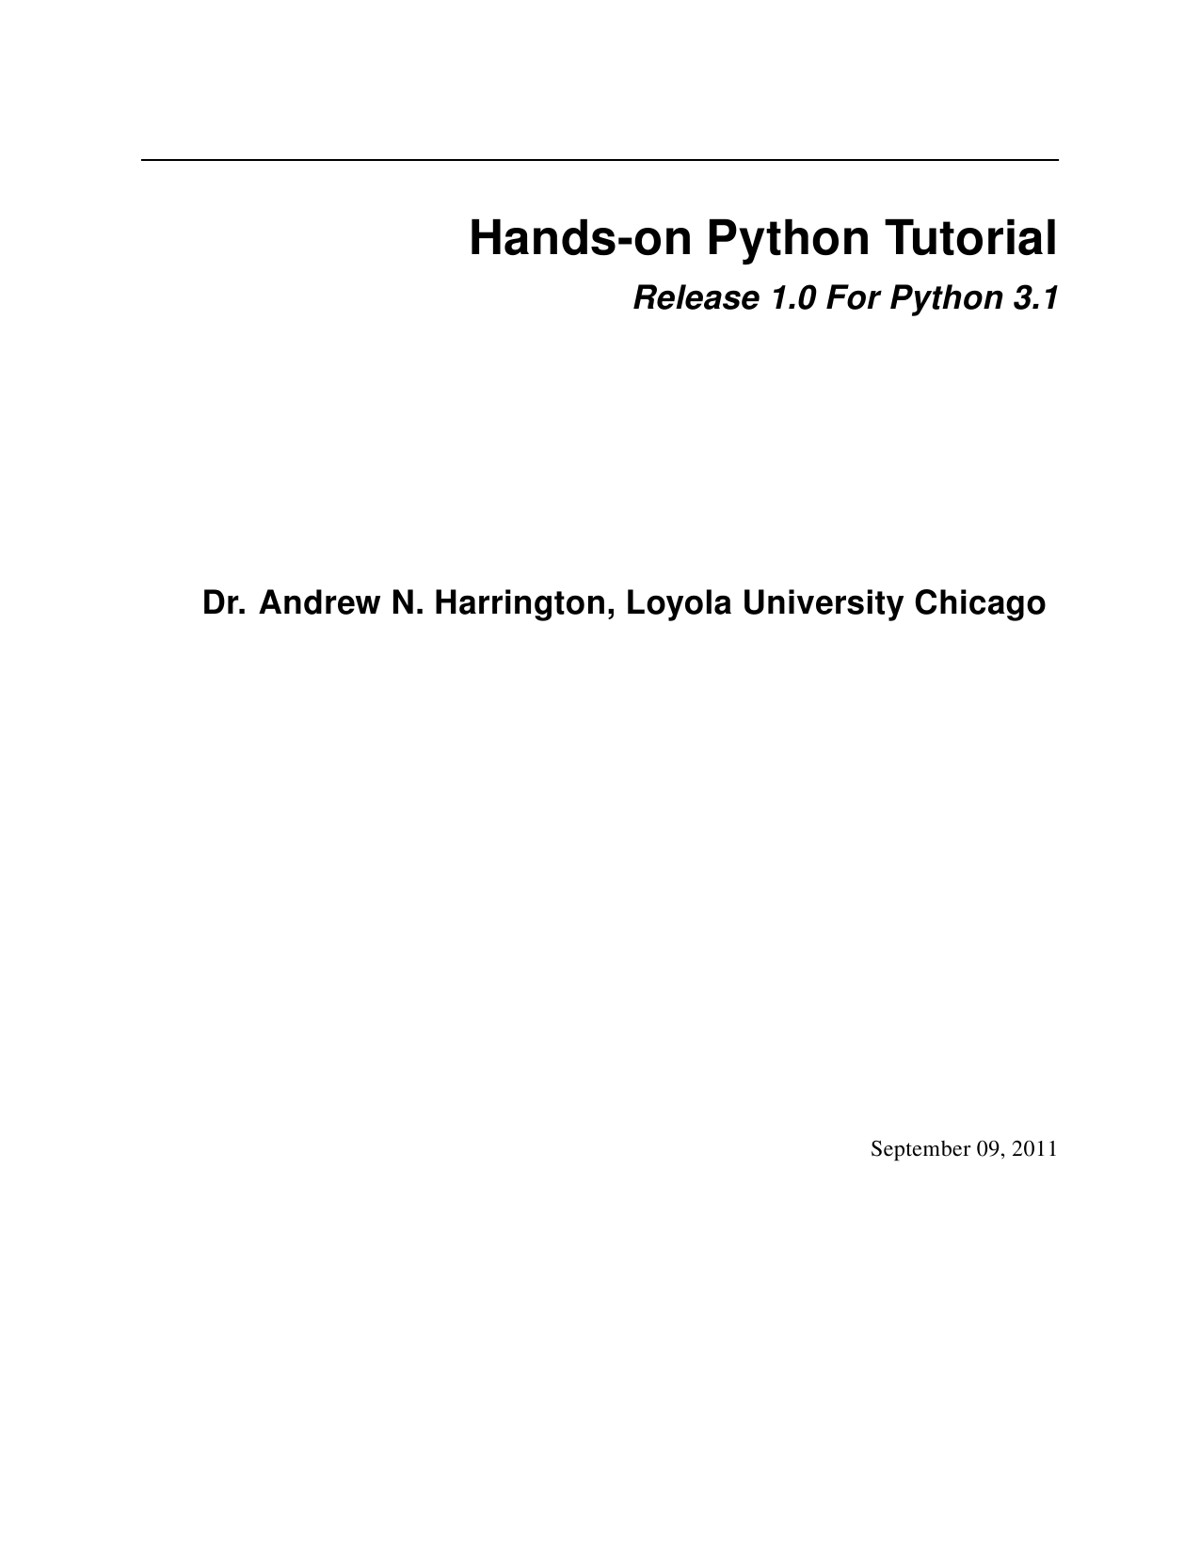 Hands-On Python. A Tutorial Introduction for Beginners. Python. 3.1 Version by Andrew N. Harrington